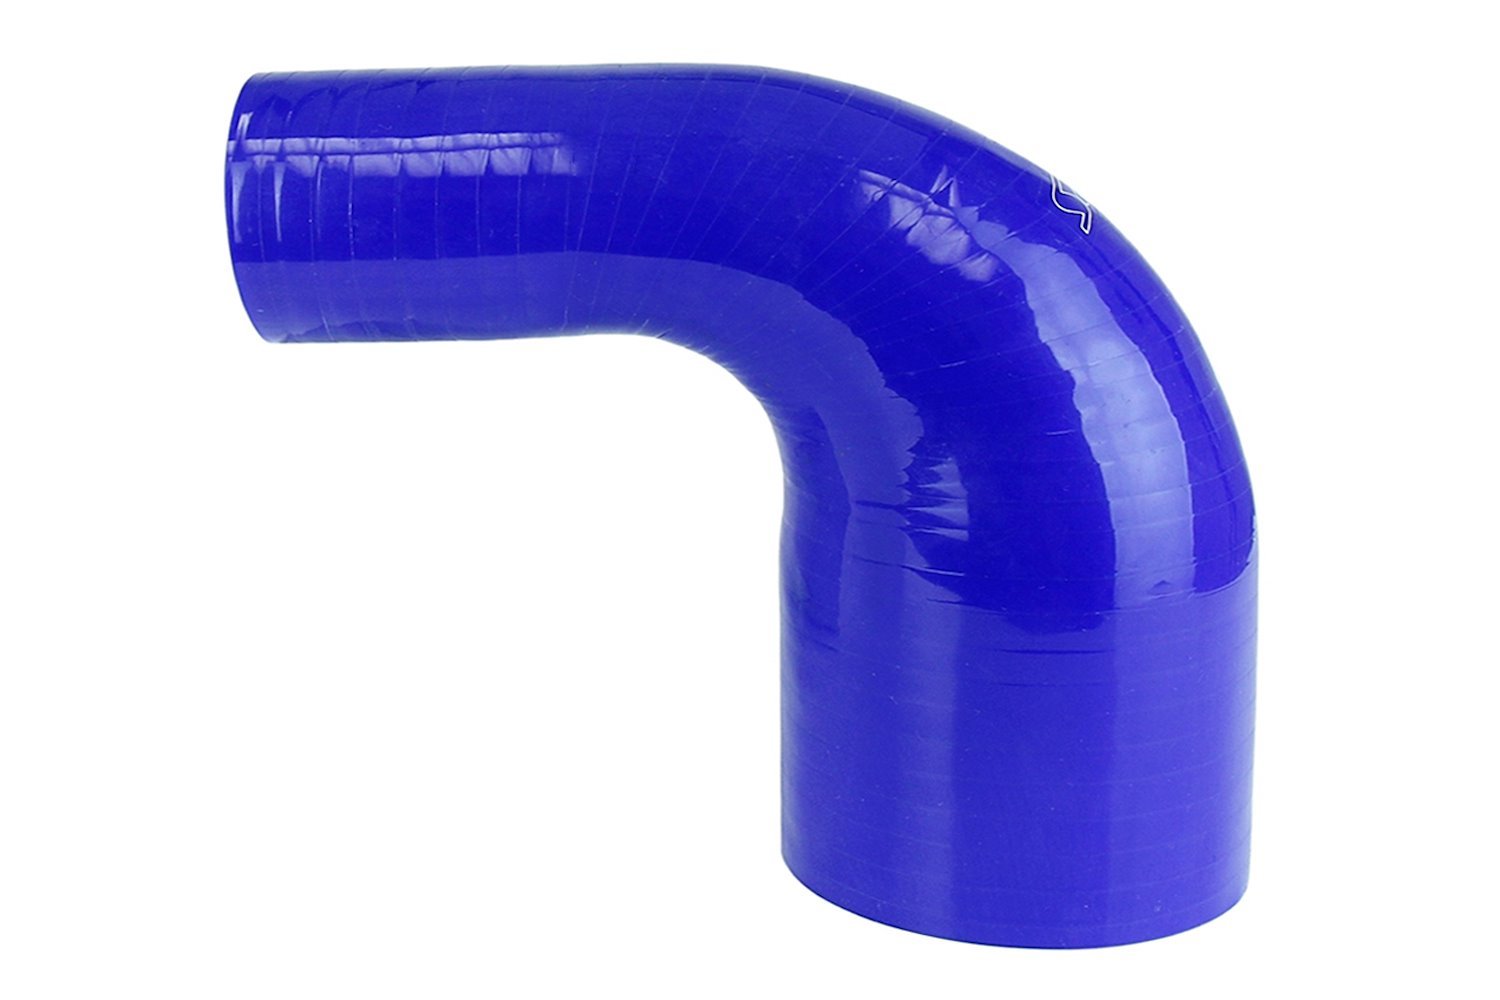 HTSER90-275-400-BLUE Silicone 90-Degree Elbow Hose, High-Temp 4-Ply Reinforced, 2-3/4 in. - 4 in. ID, Blue